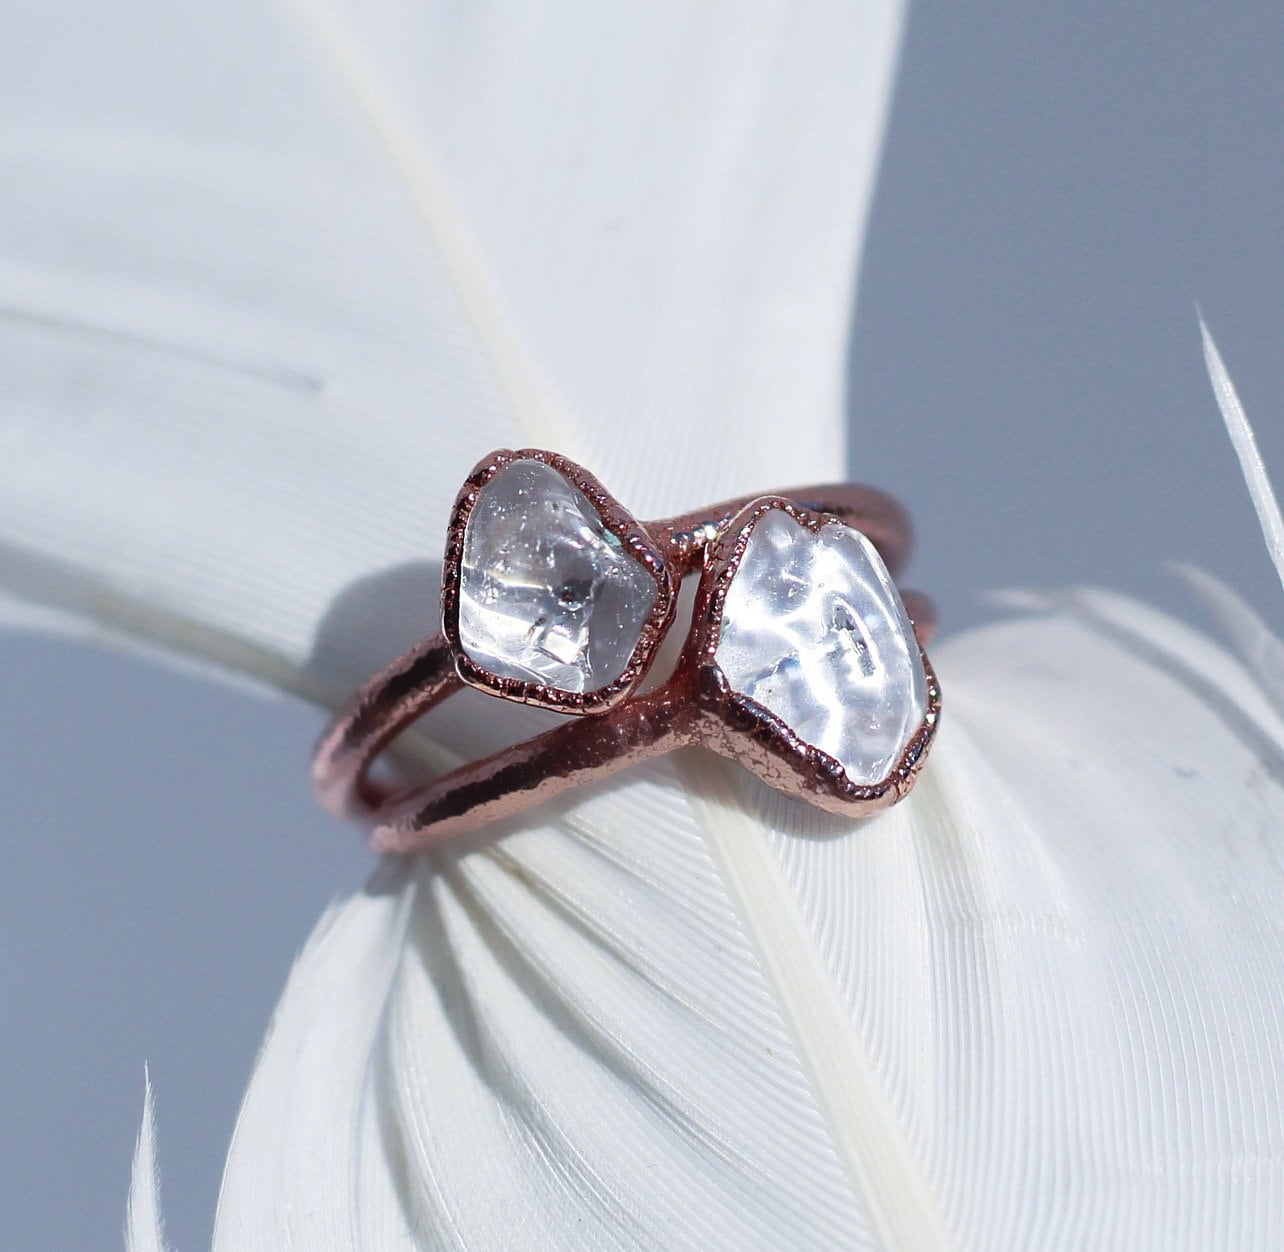 Quartz Crystal Carved Raw Stone Rings – Well Done Goods, by Cyberoptix